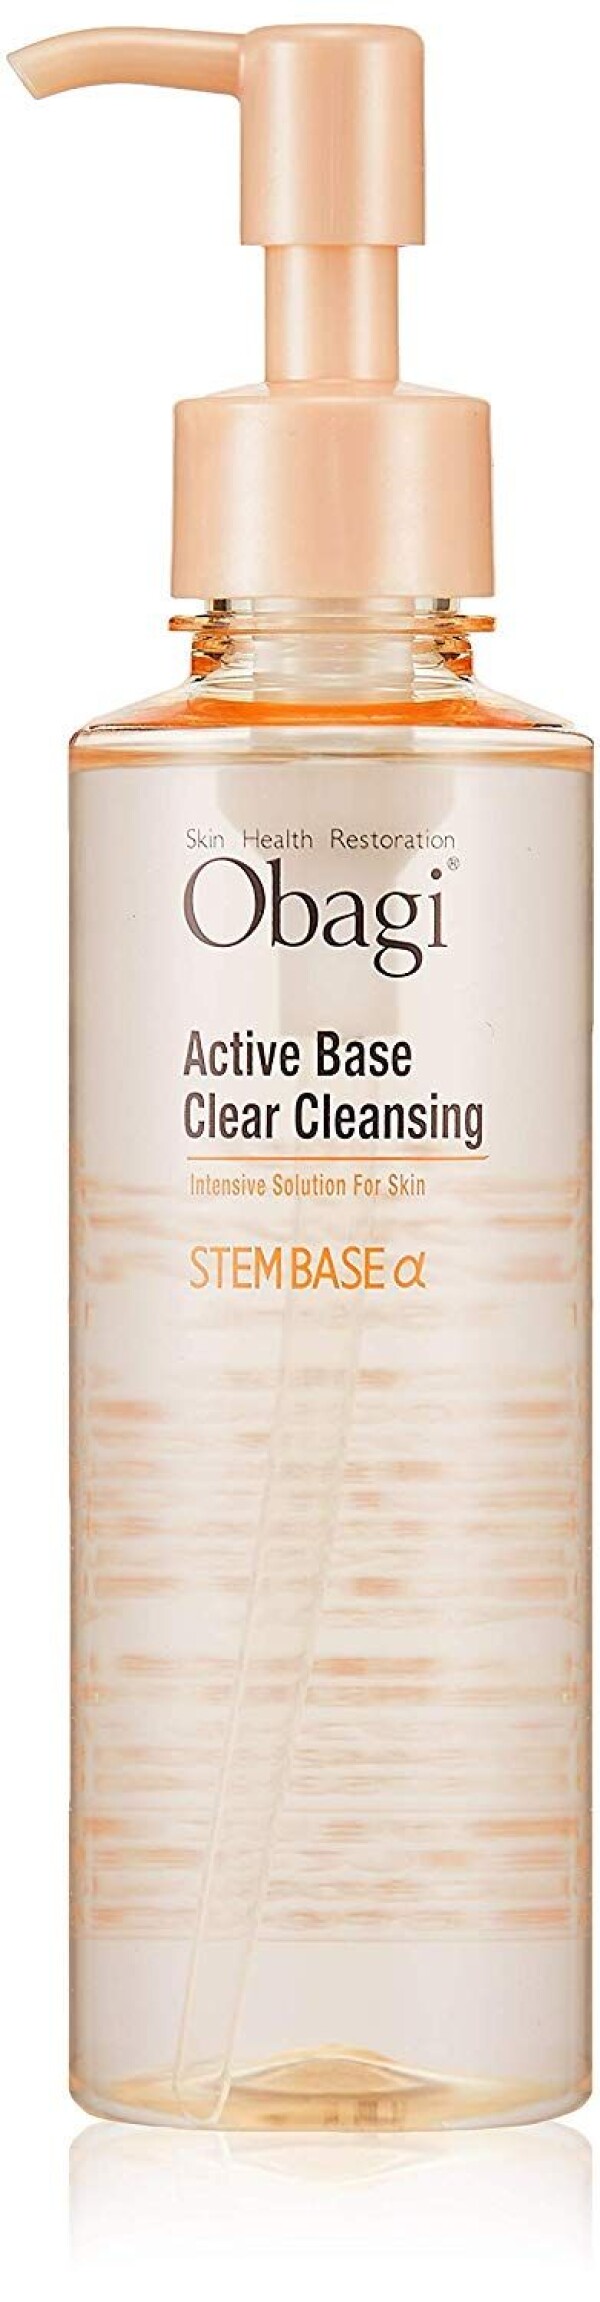 Obagi Active Base Clear Cleansing Oil